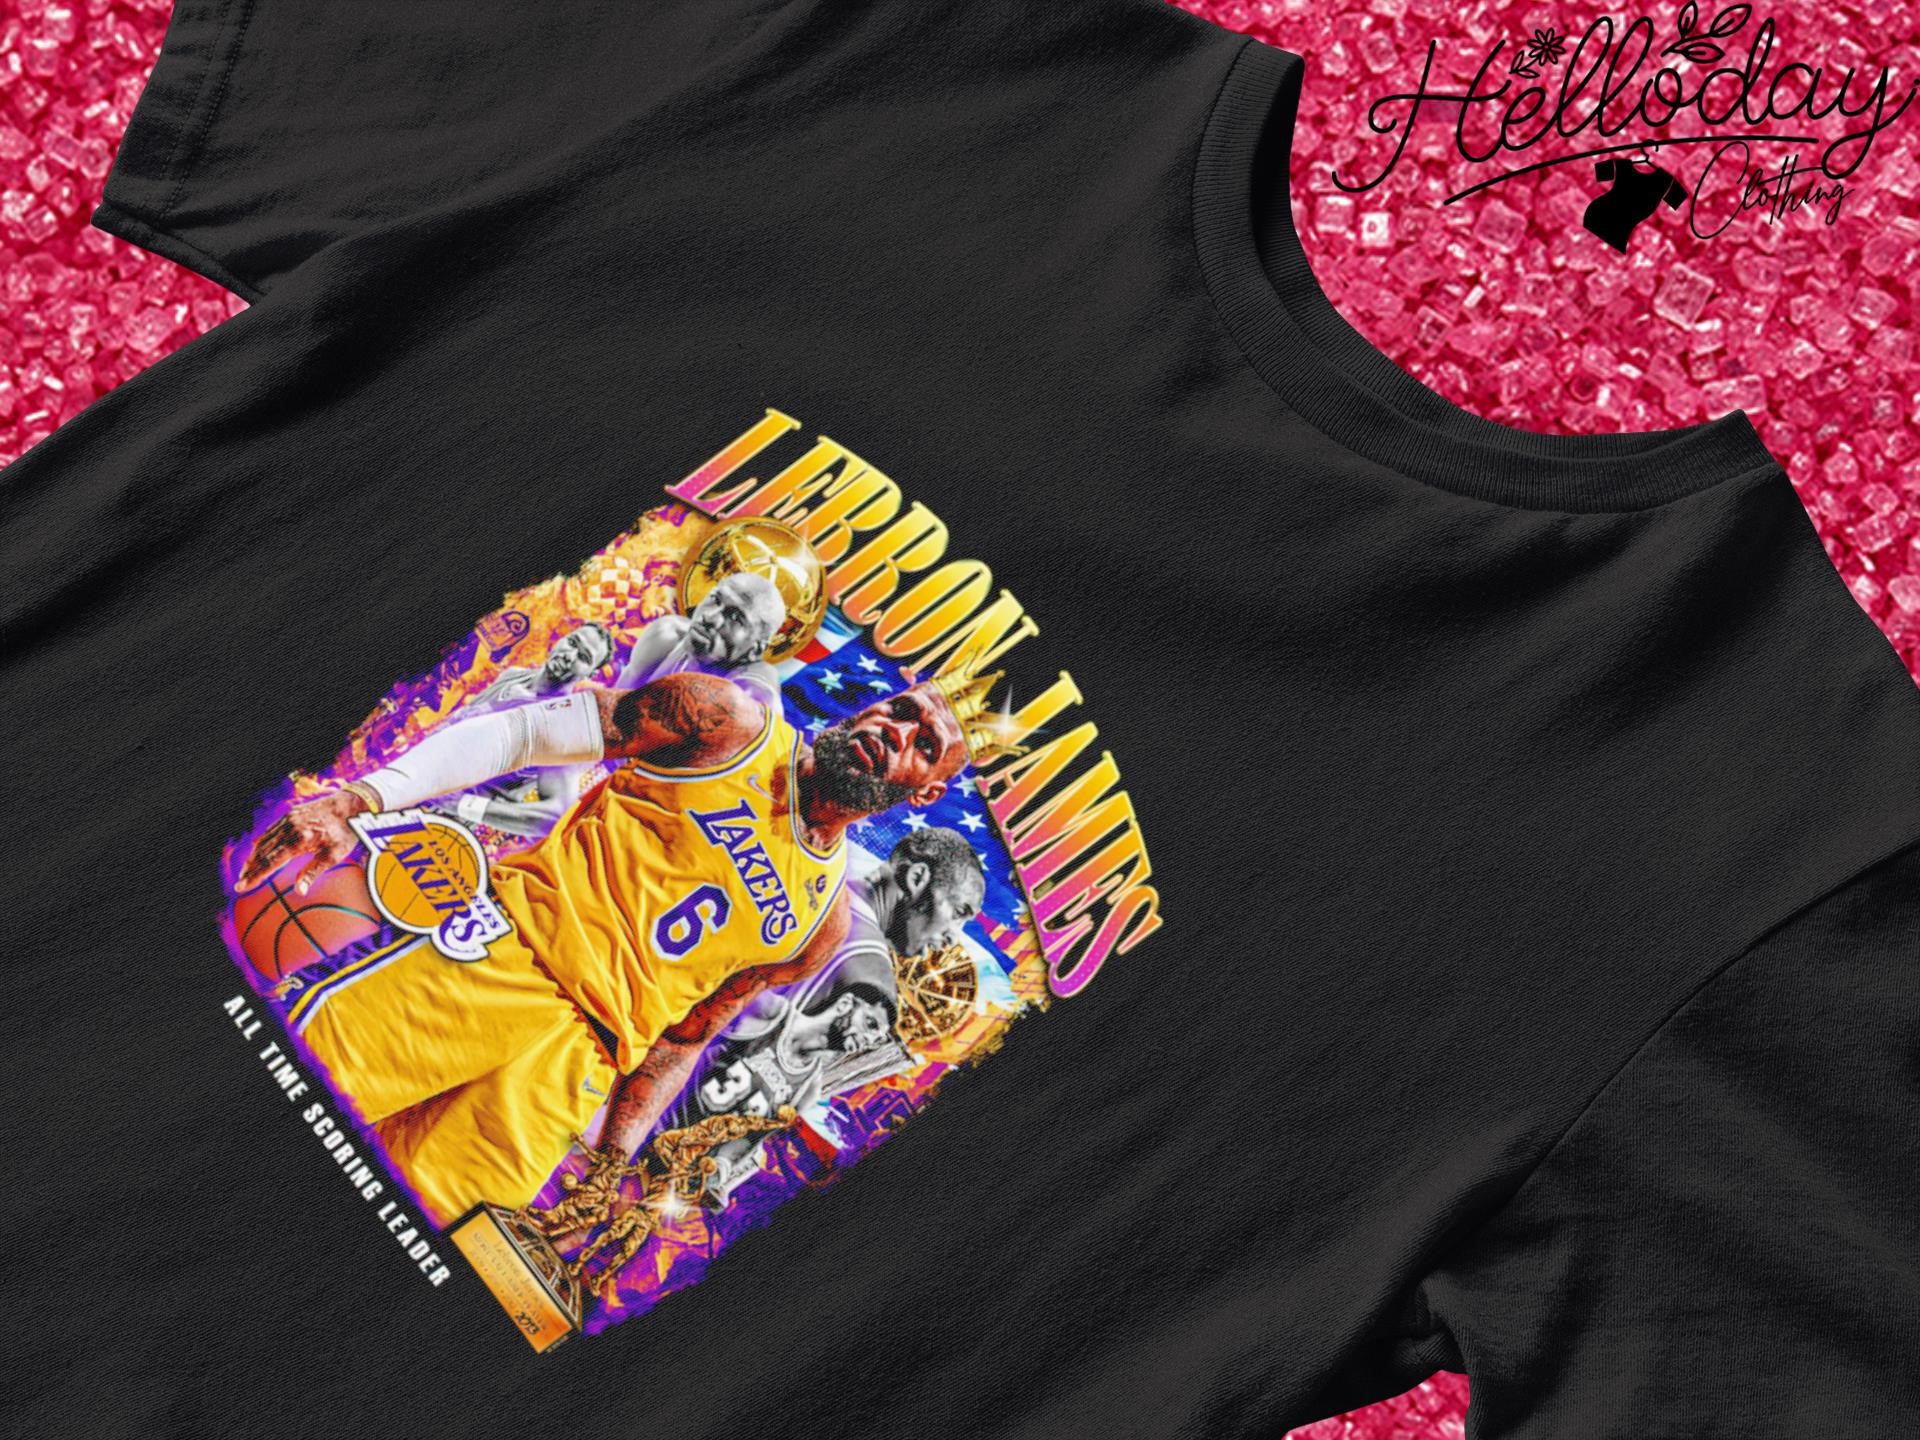 King Lebron James all time scoring leader Los Angeles Lakers shirt